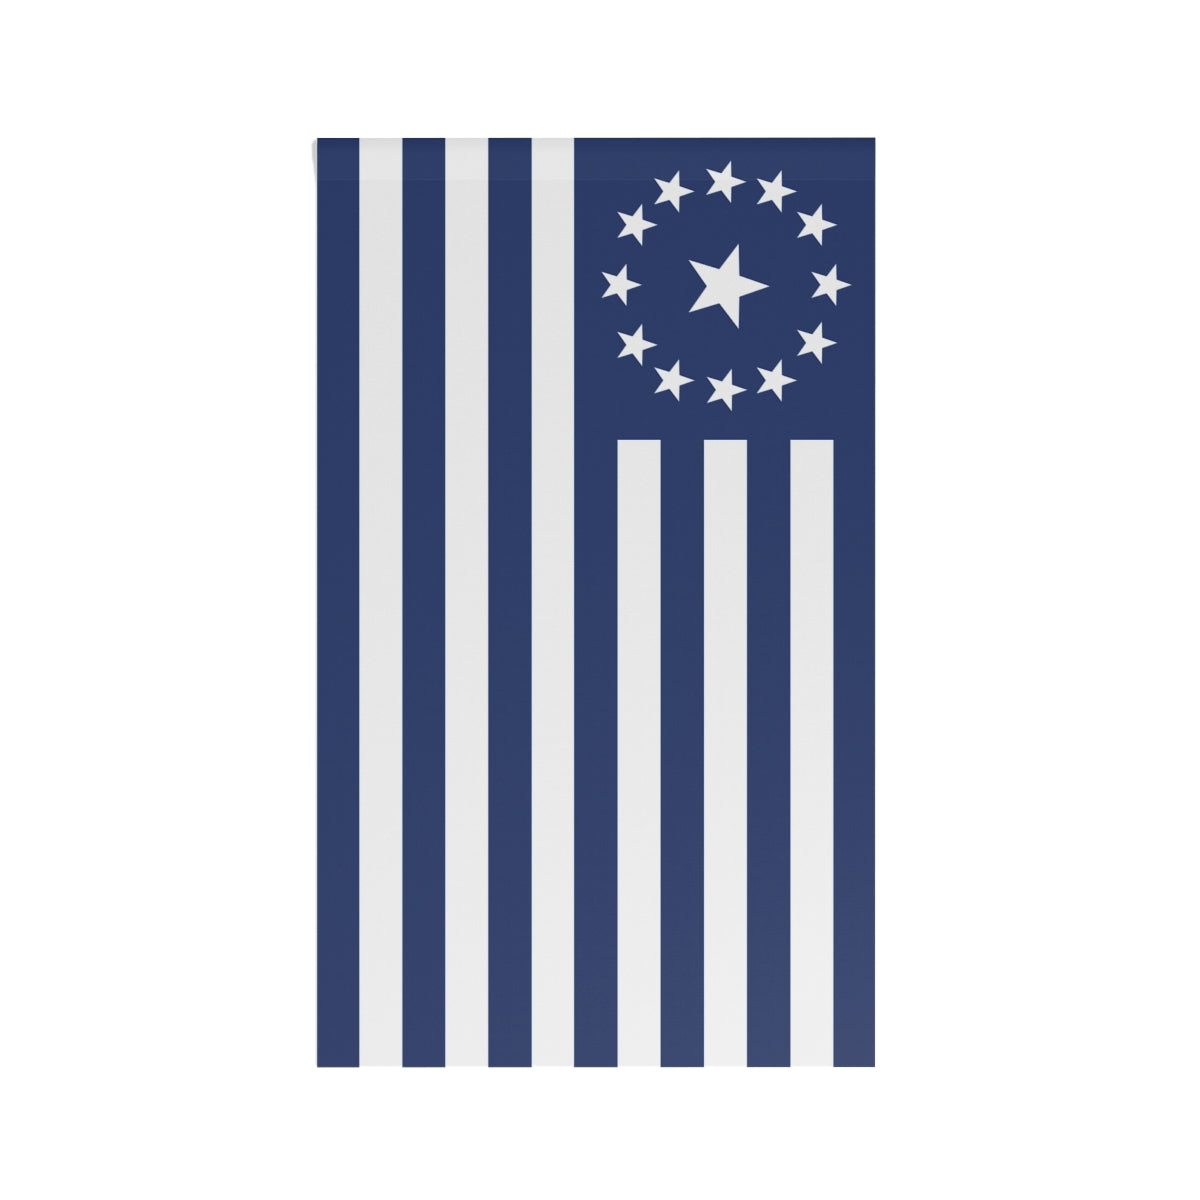 Deseret State Territory Flag - Replica Flag of Deseret Kimball Maguire Flag